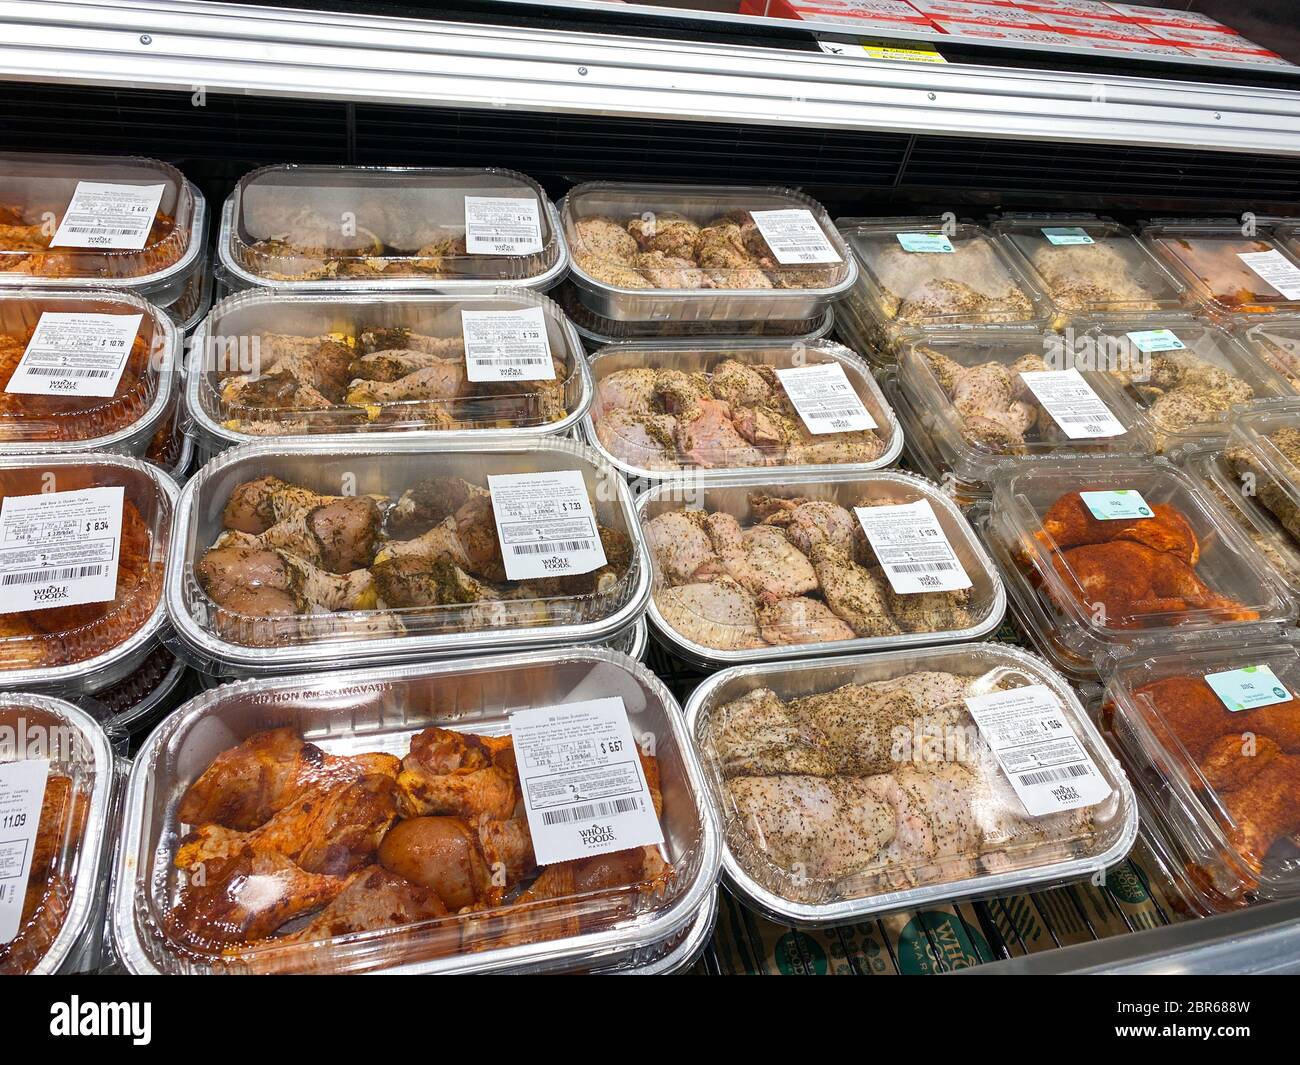 Orlando, FL/USA-5/3/20:  A display of ready to bake chicken dinners at a Whole Foods Market  grocery store waiting for customers to purchase. Stock Photo